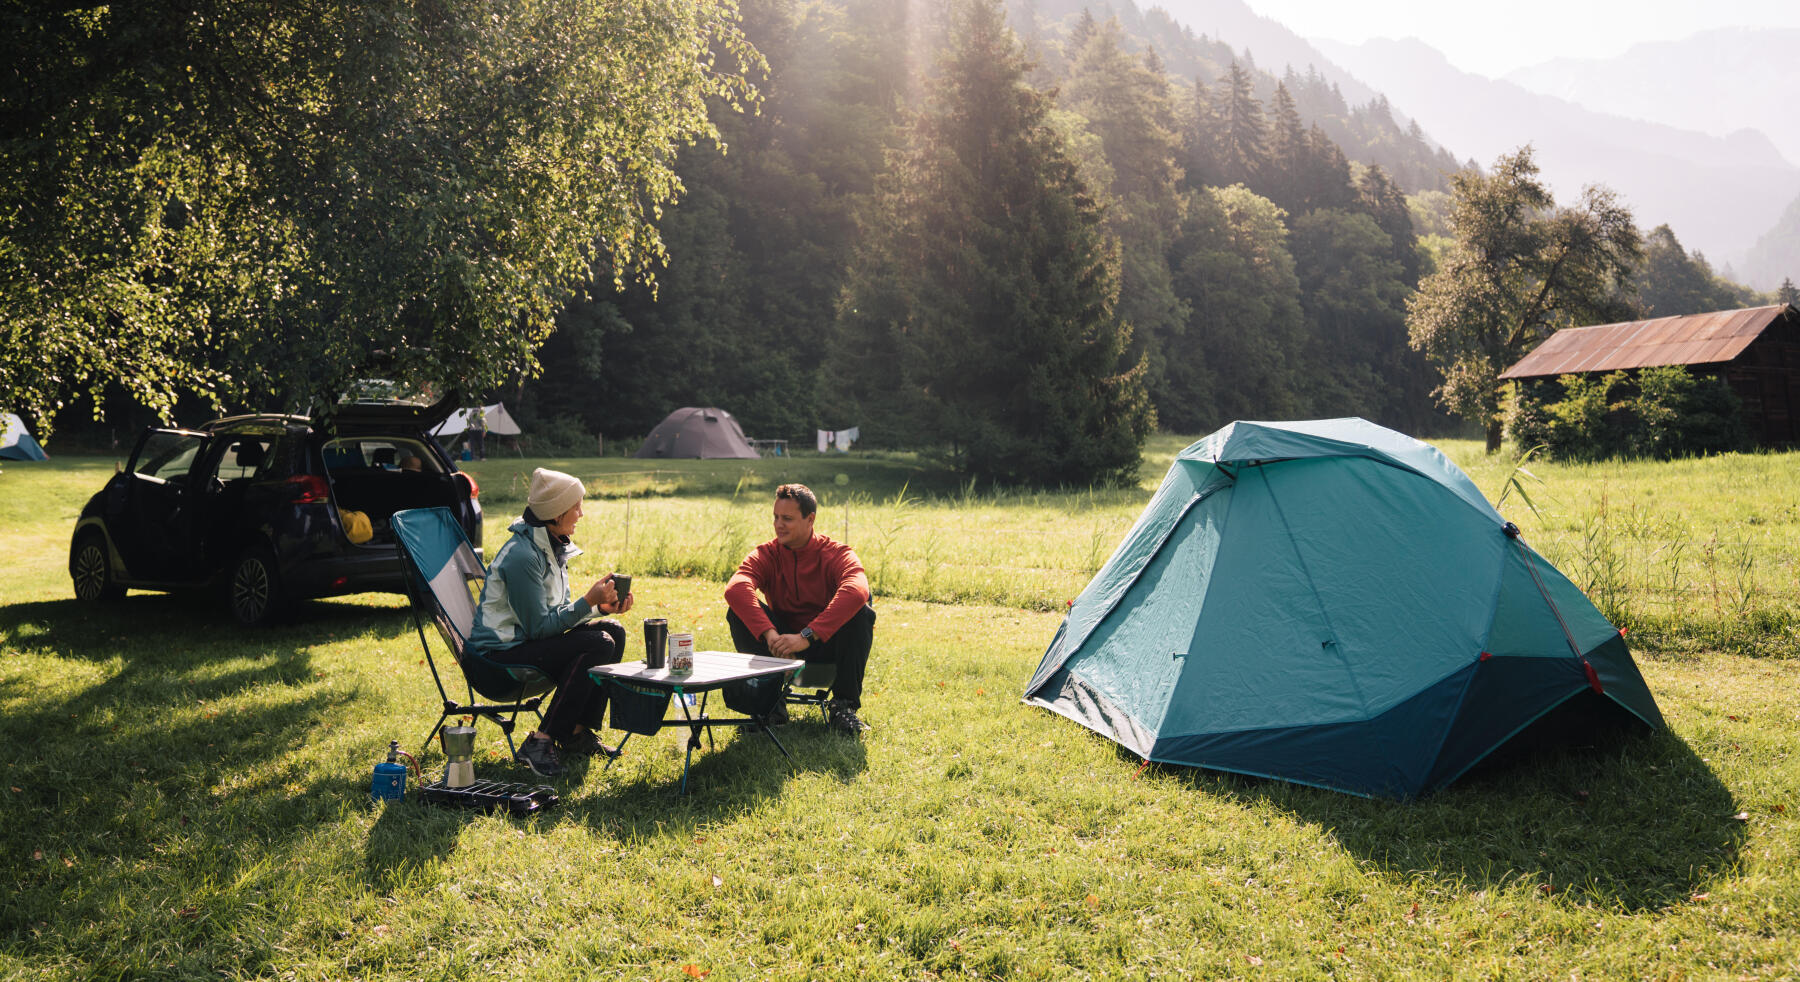 HOW DO YOU CARE FOR AND STORE AWAY YOUR TENT?